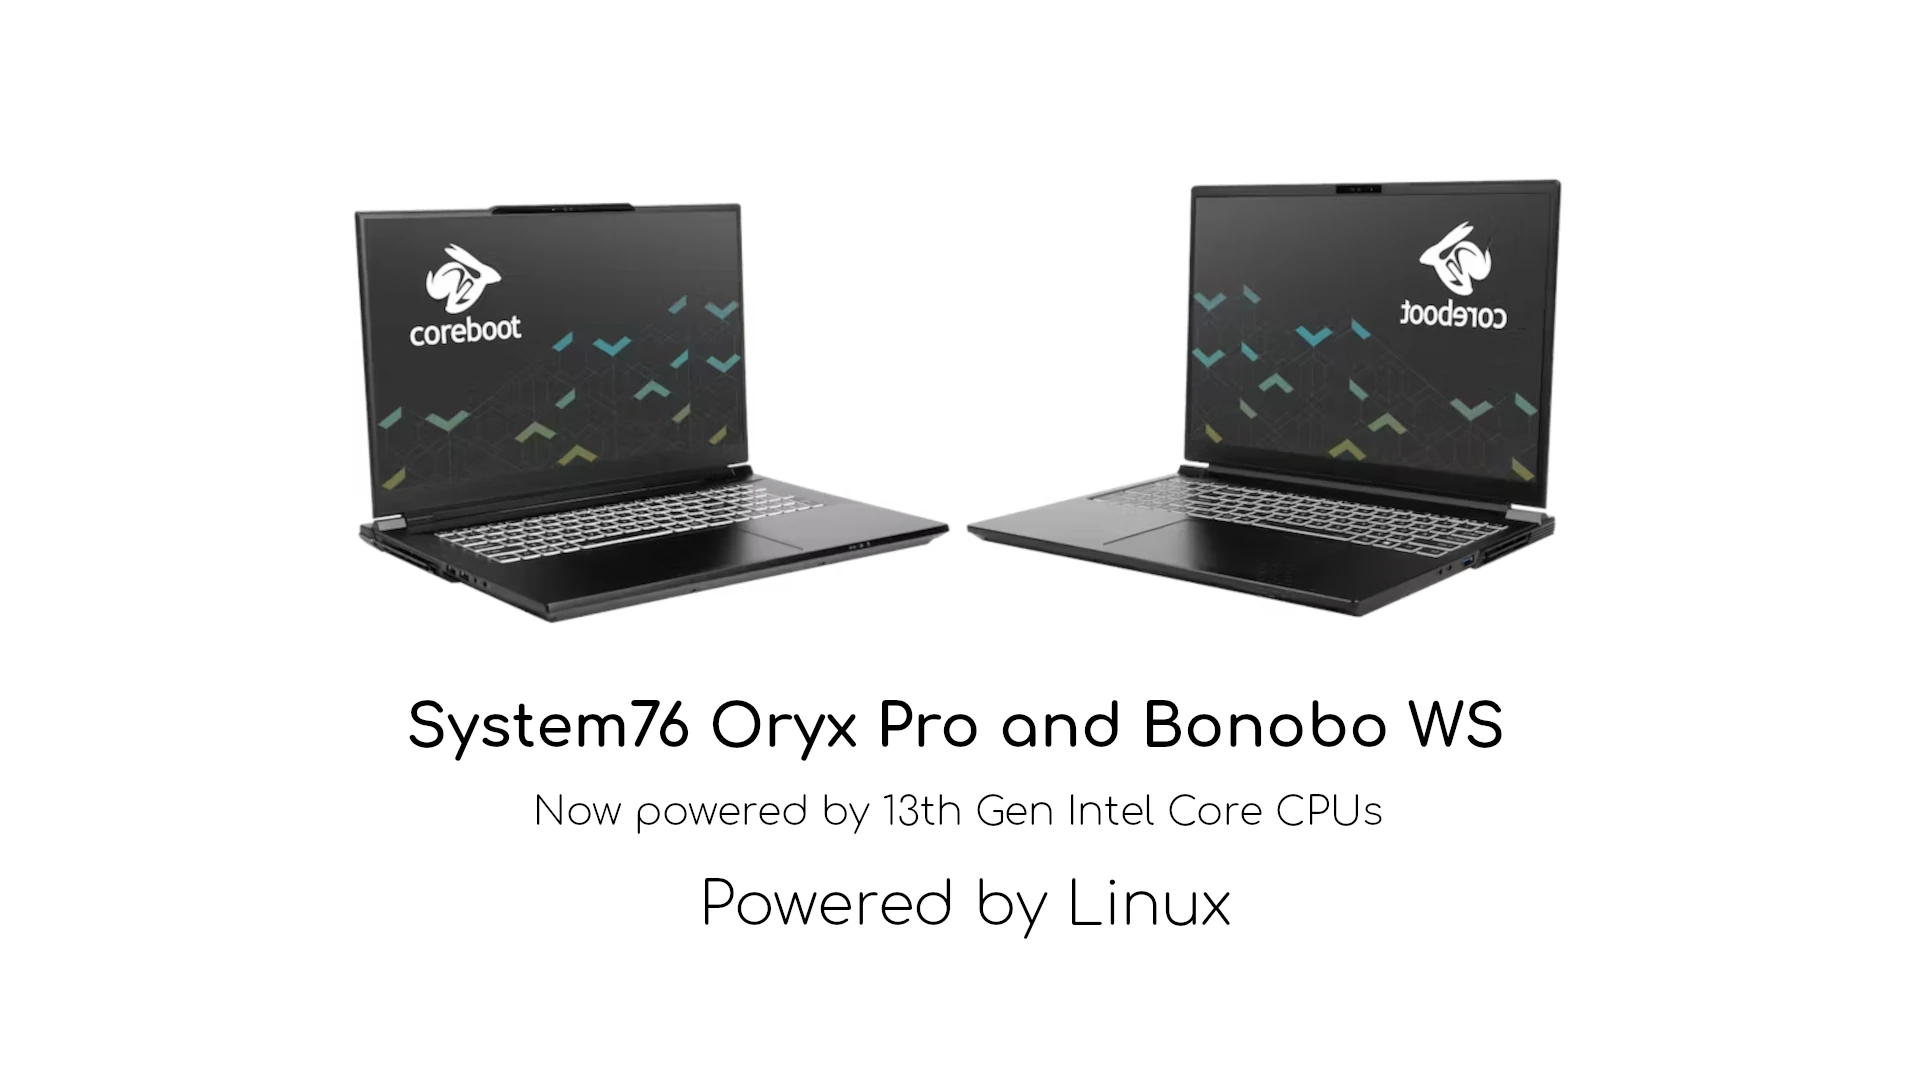 System76’s Oryx Pro and Bonobo WS Linux Laptops Get “Raptor Lake” CPUs